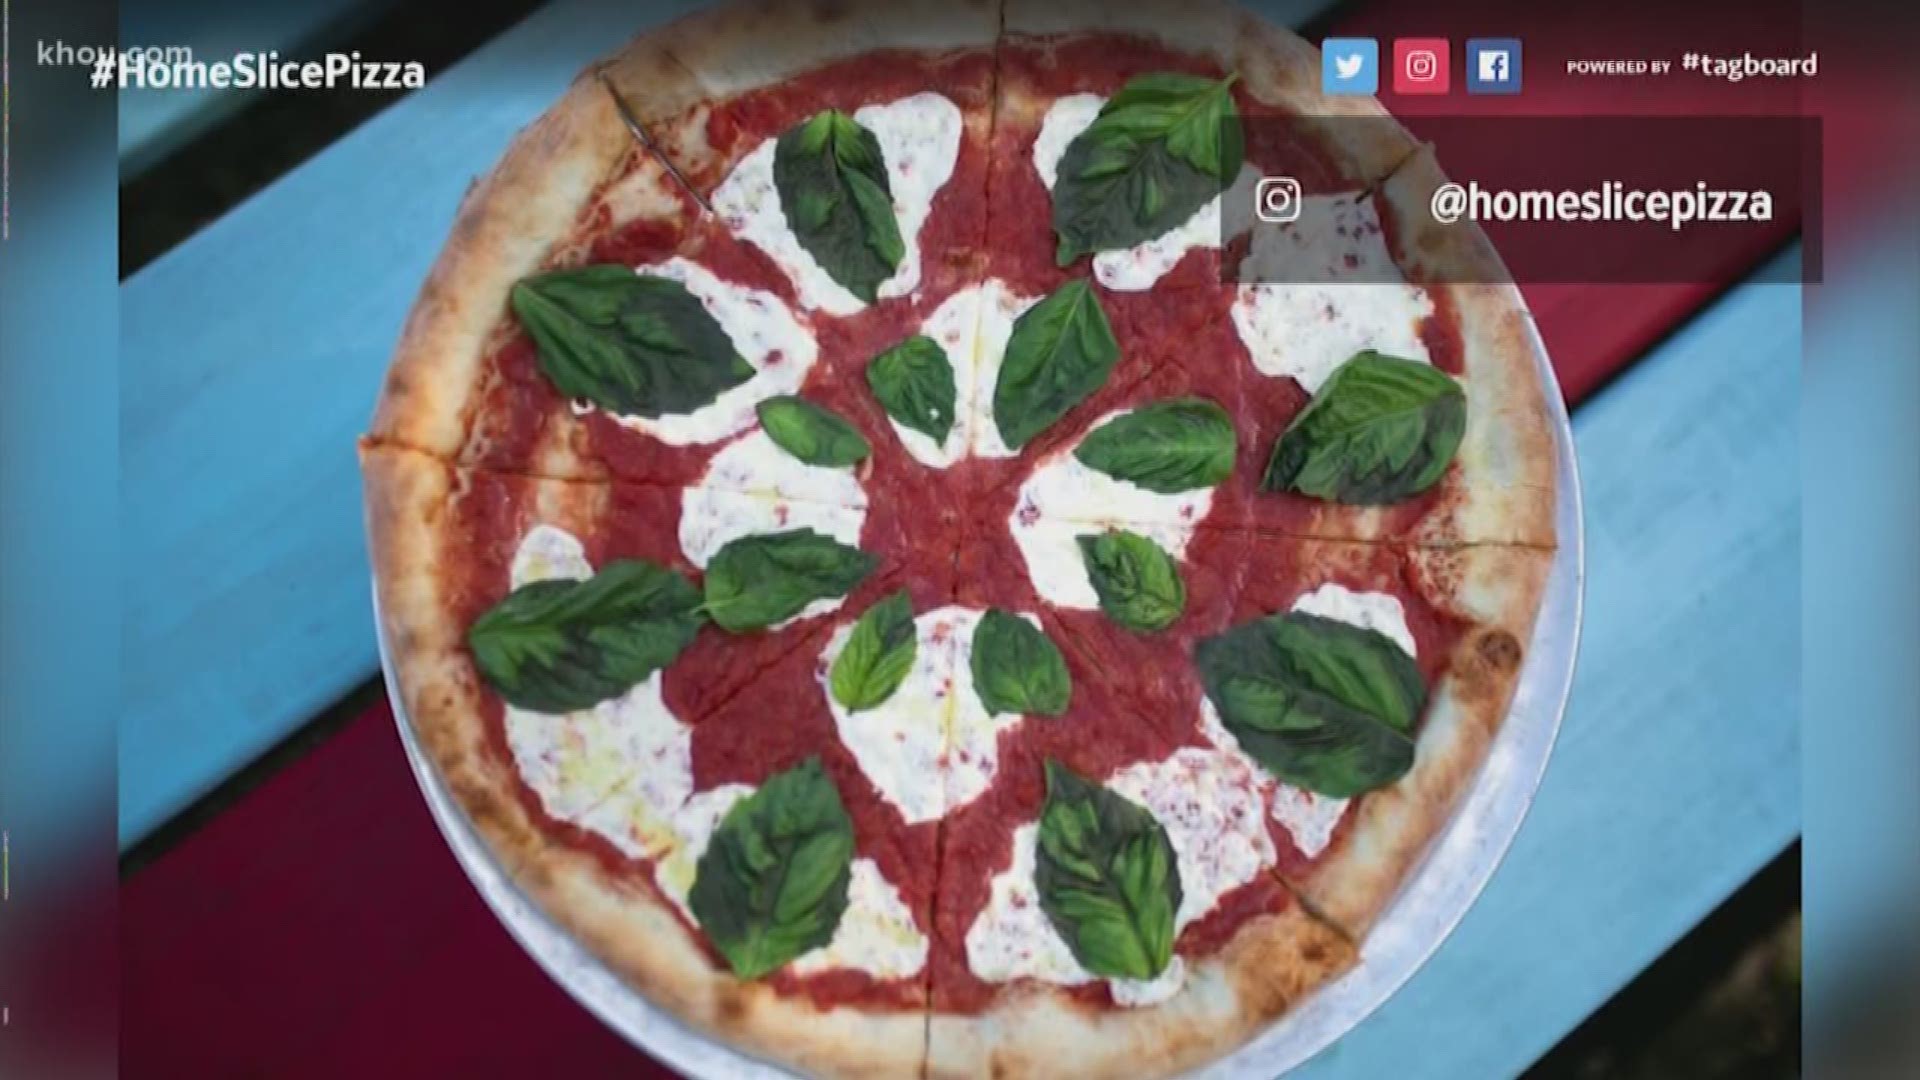 TripAdvisor has a list that ranks the best pizzerias in every state and Houston got snubbed. The winner in Texas is "Home Slice" pizza in Austin. It even came in No. 4 overall in the country.